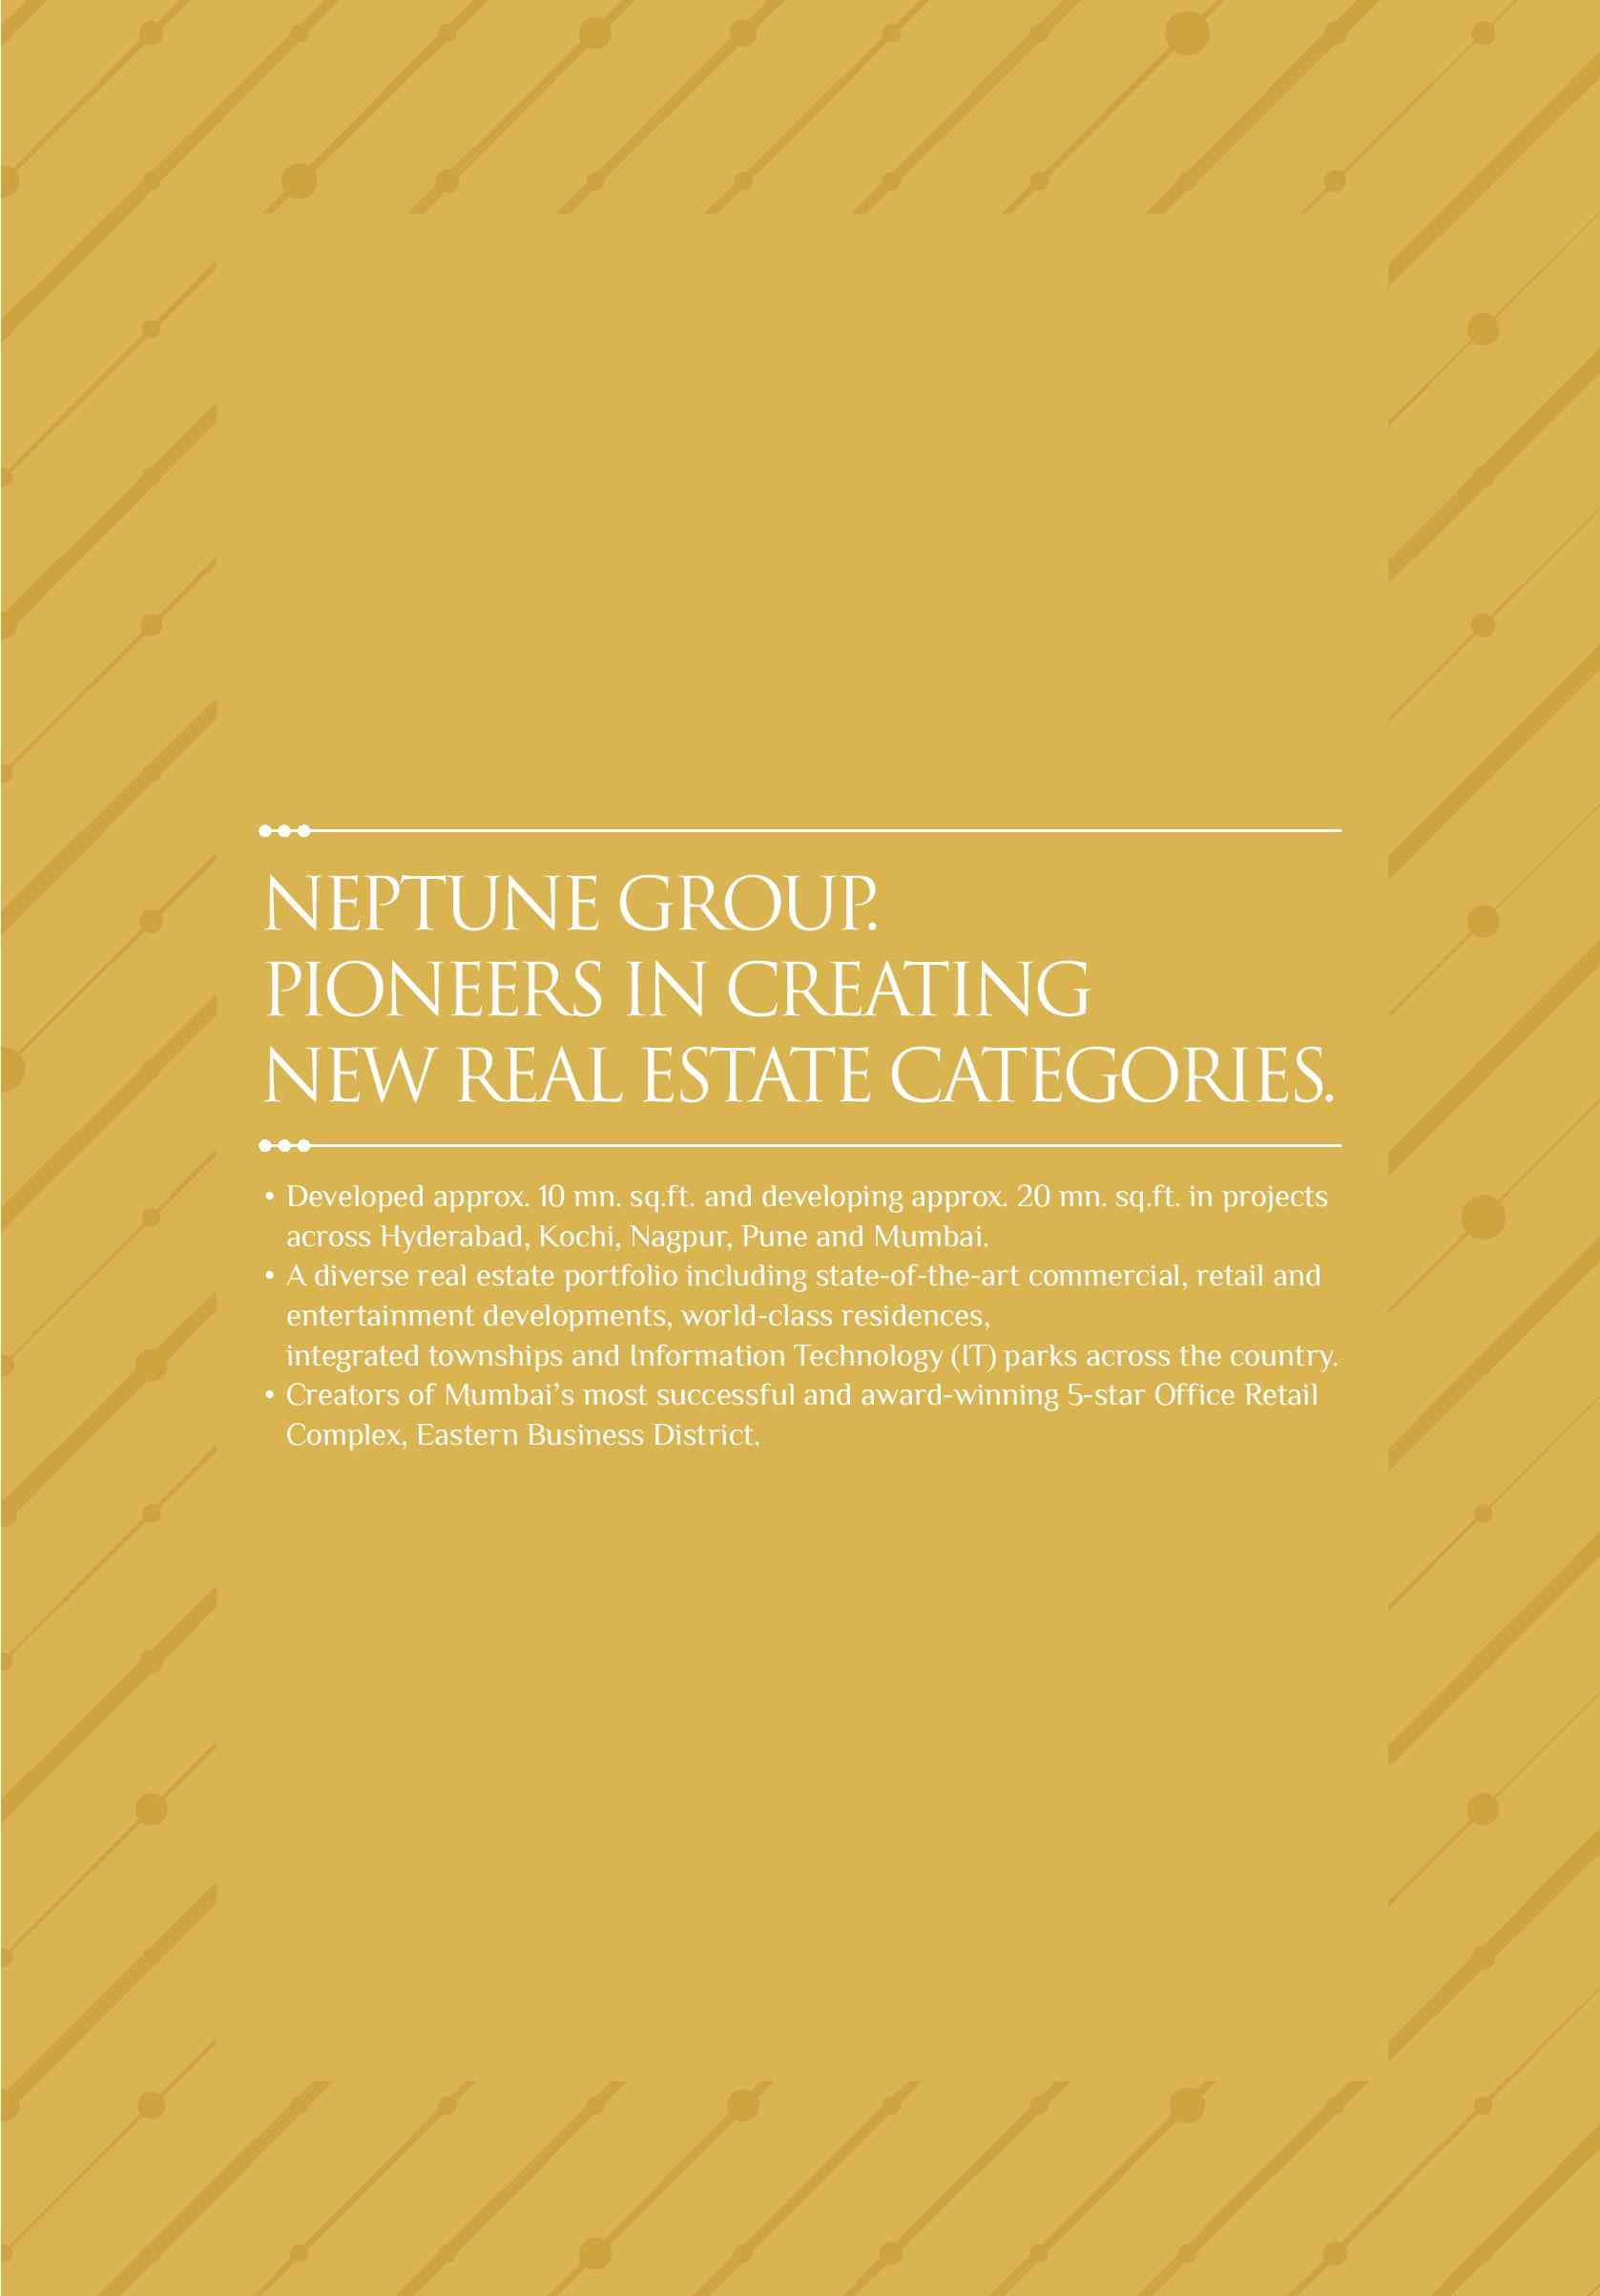 Neptune Group partnering with the finest & creating new Real Estate categories Update